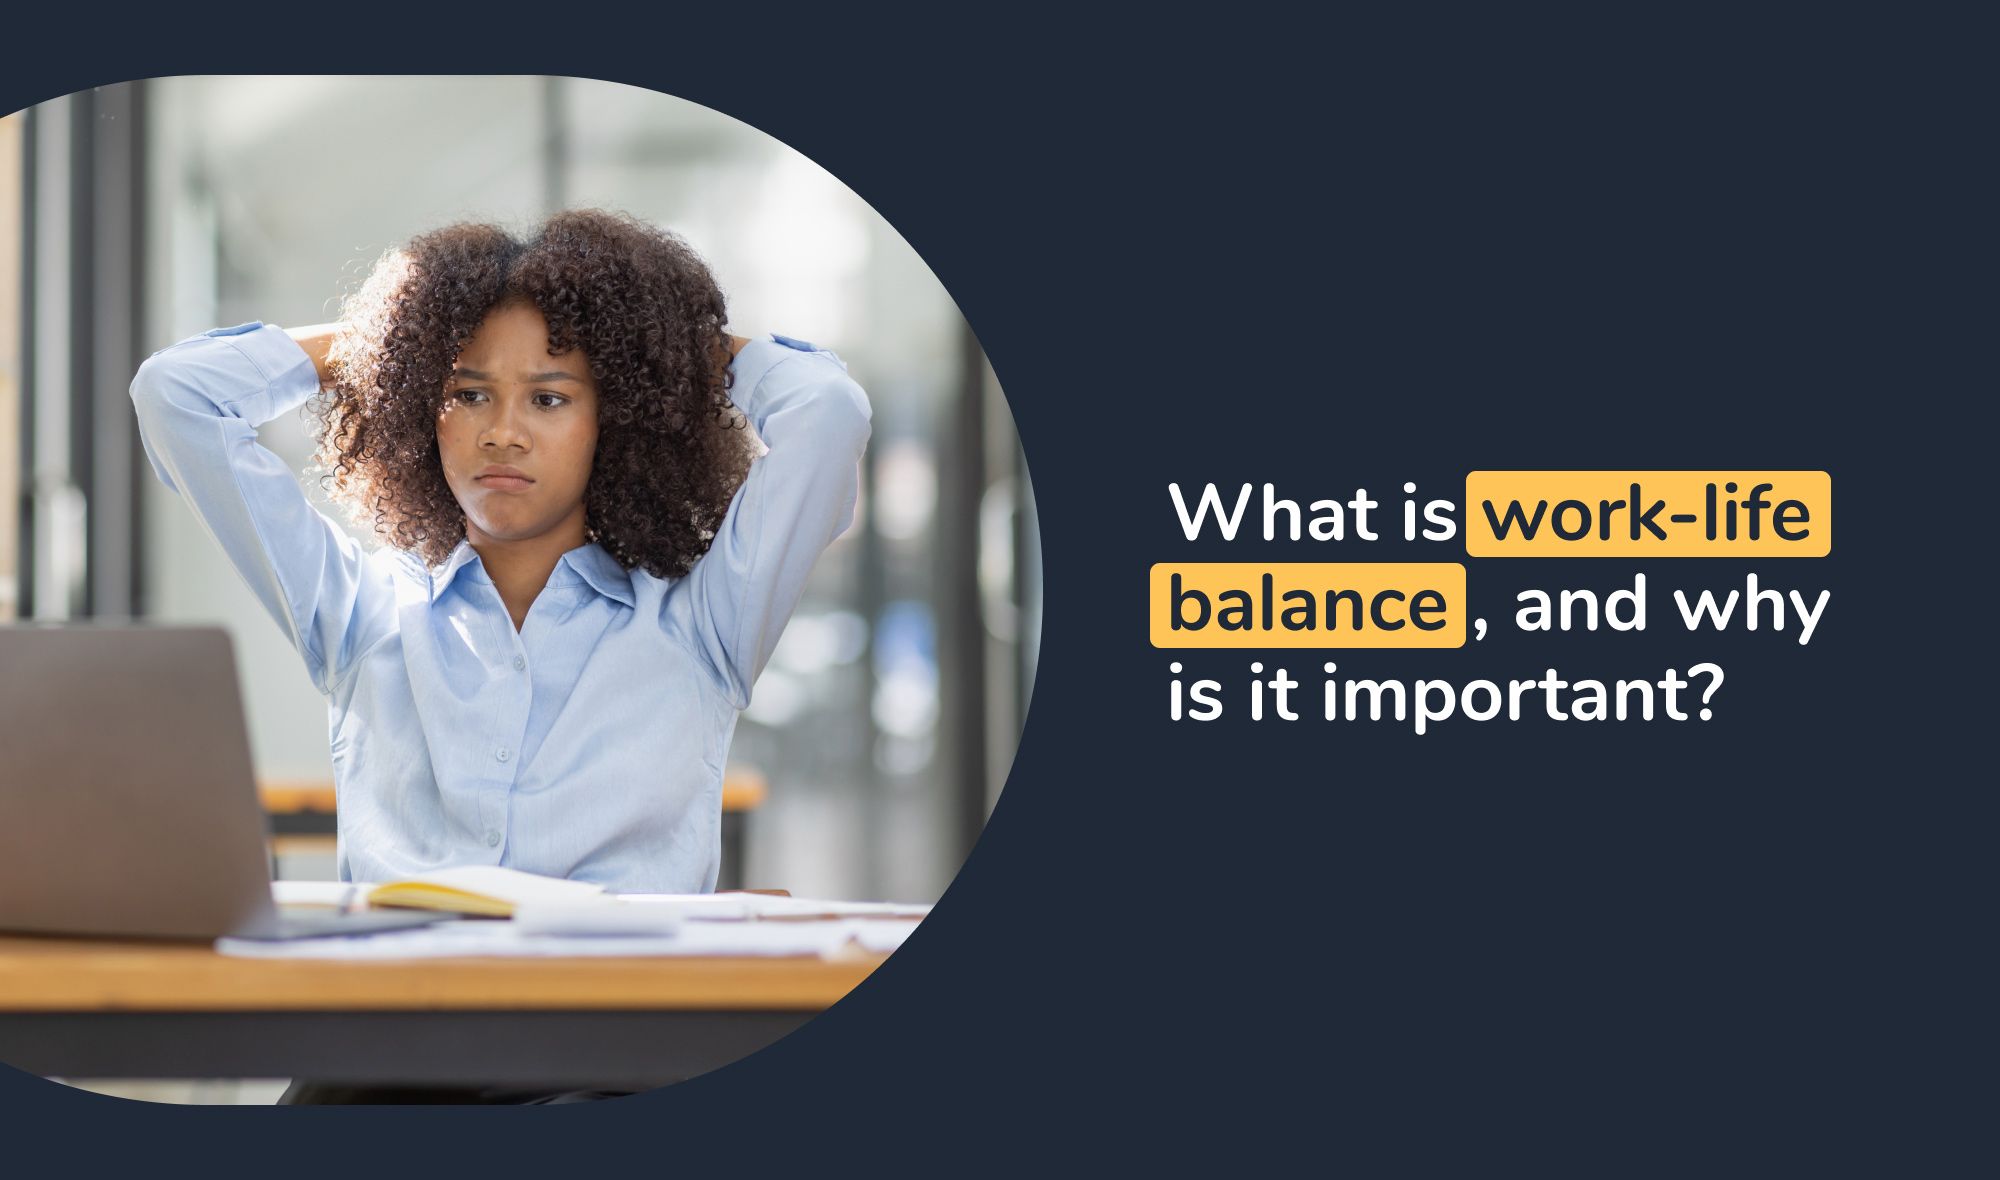 How to find life balance: What is work-life balance, and why is it important?